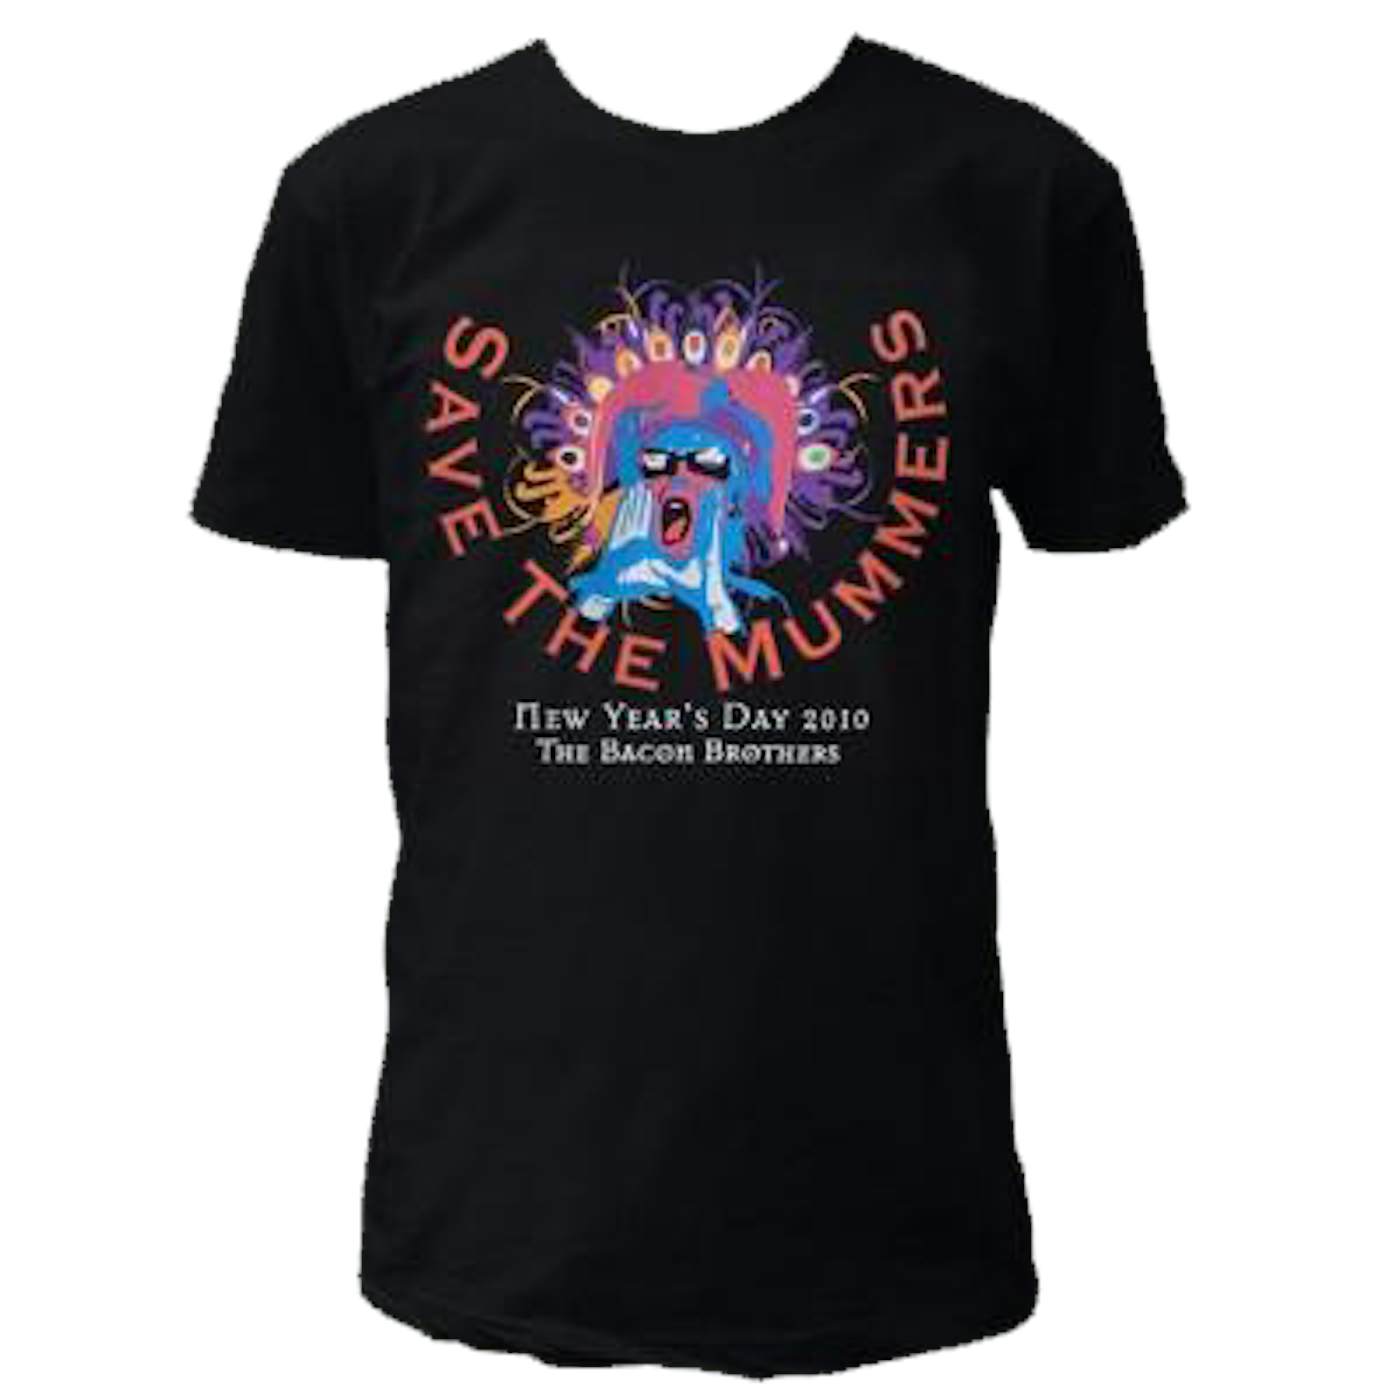 The Bacon Brothers Save The Mummers T-Shirt